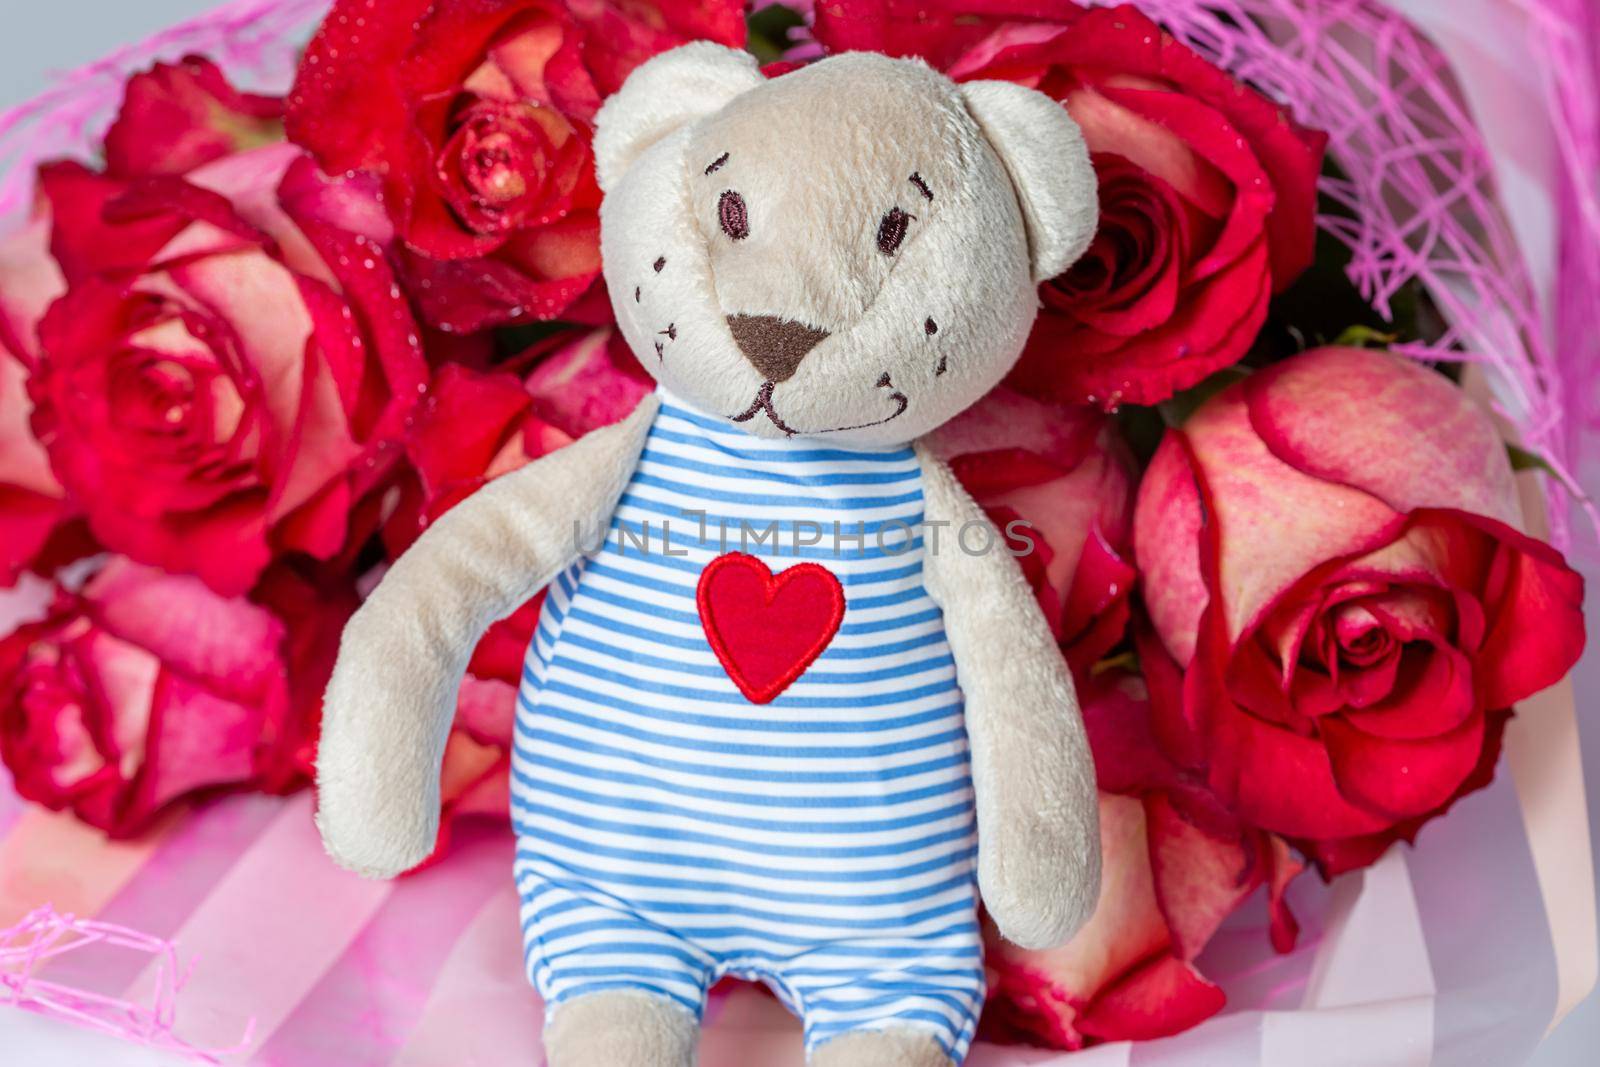 A bouquet of red roses in a gift paper package and a soft toy bear by galinasharapova